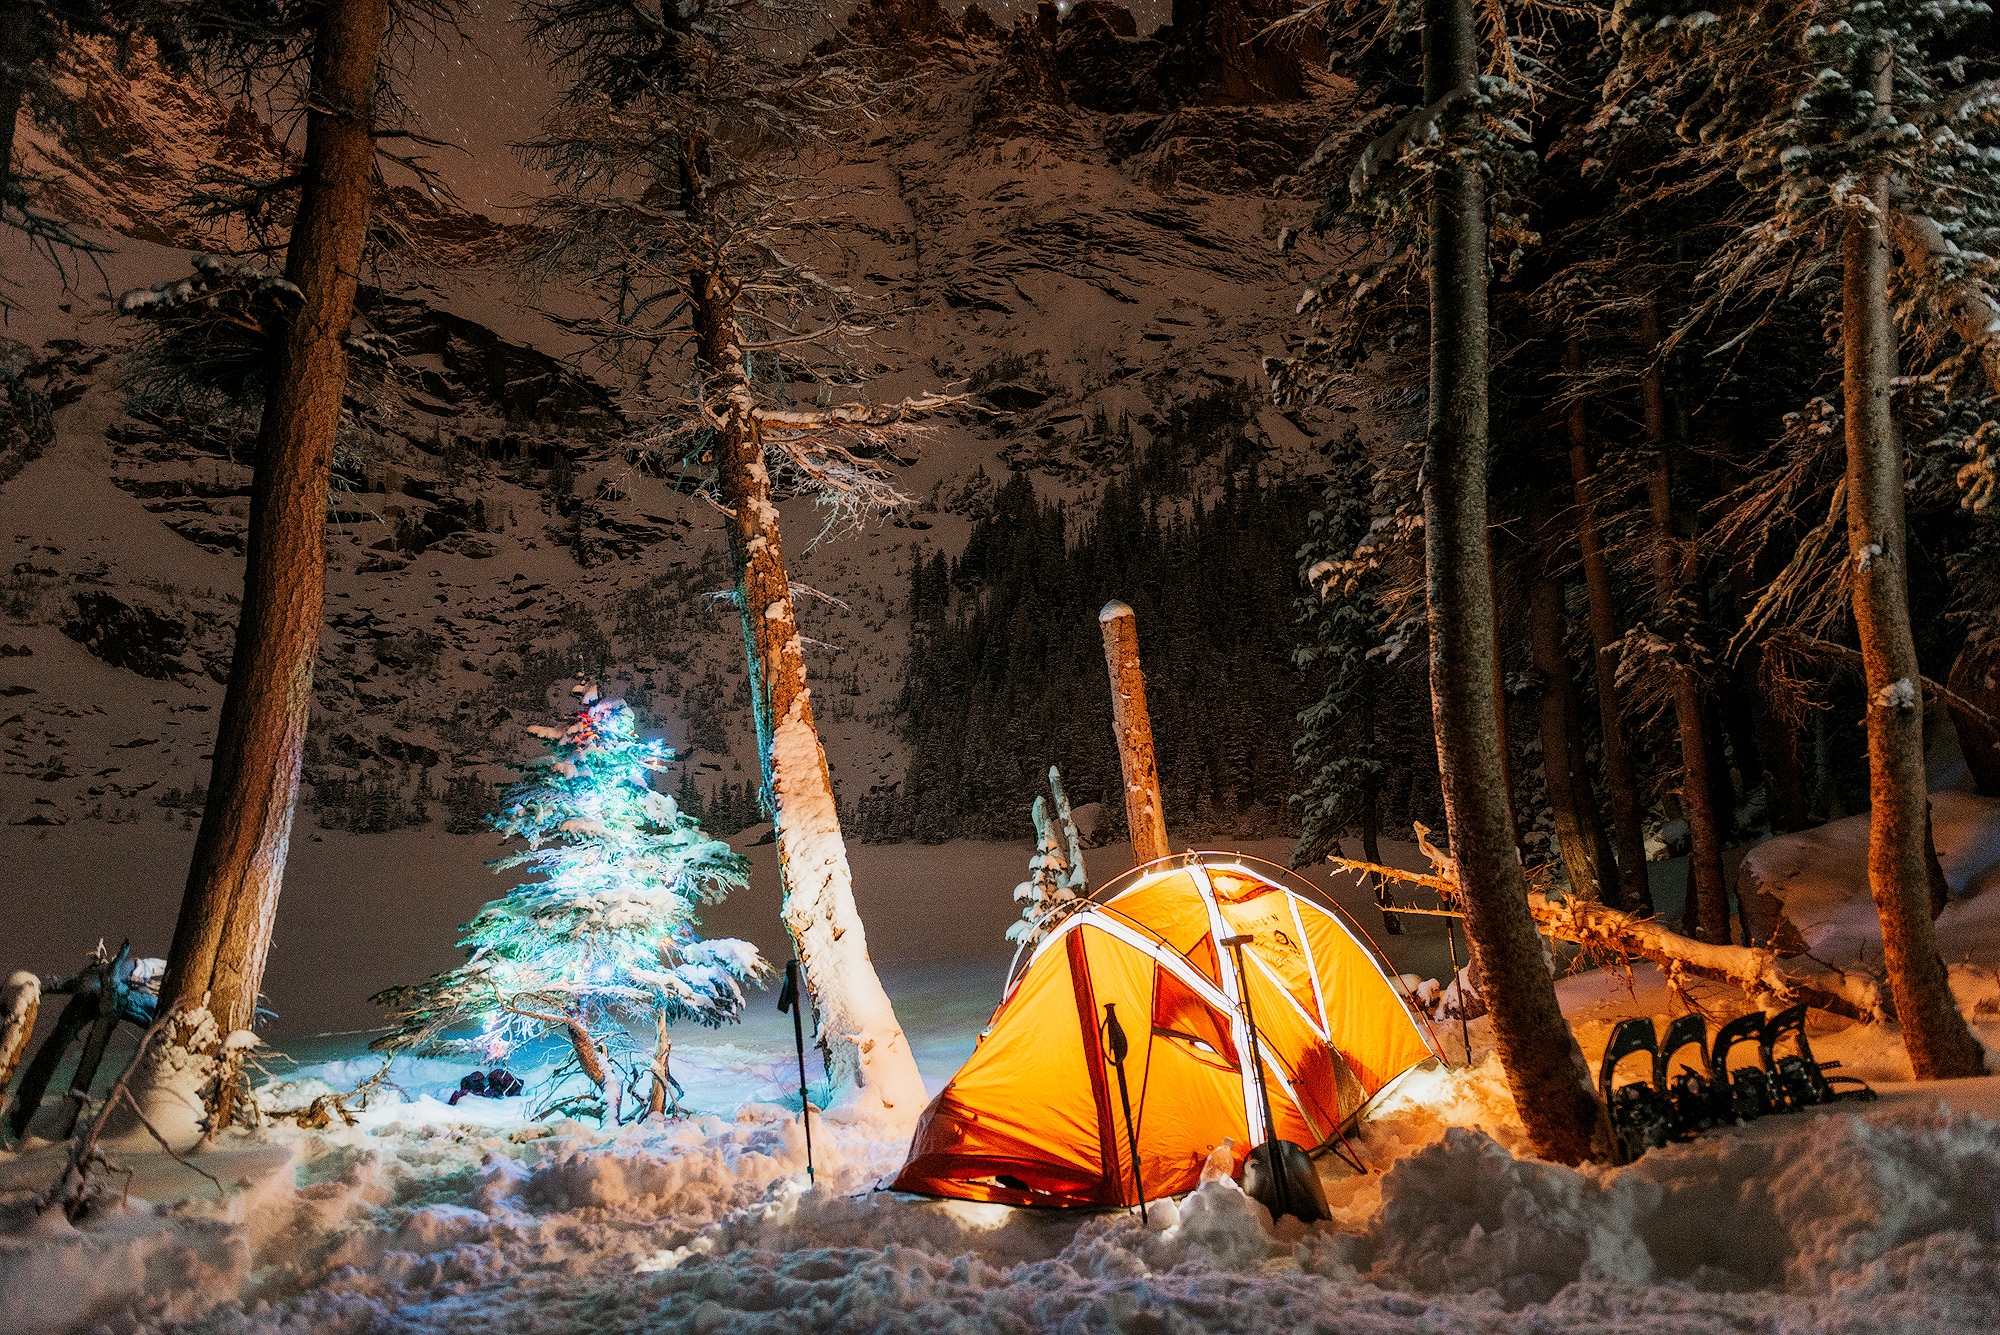 Night Photography Tips & Tricks - Light Up Your Winter. Renee Roaming